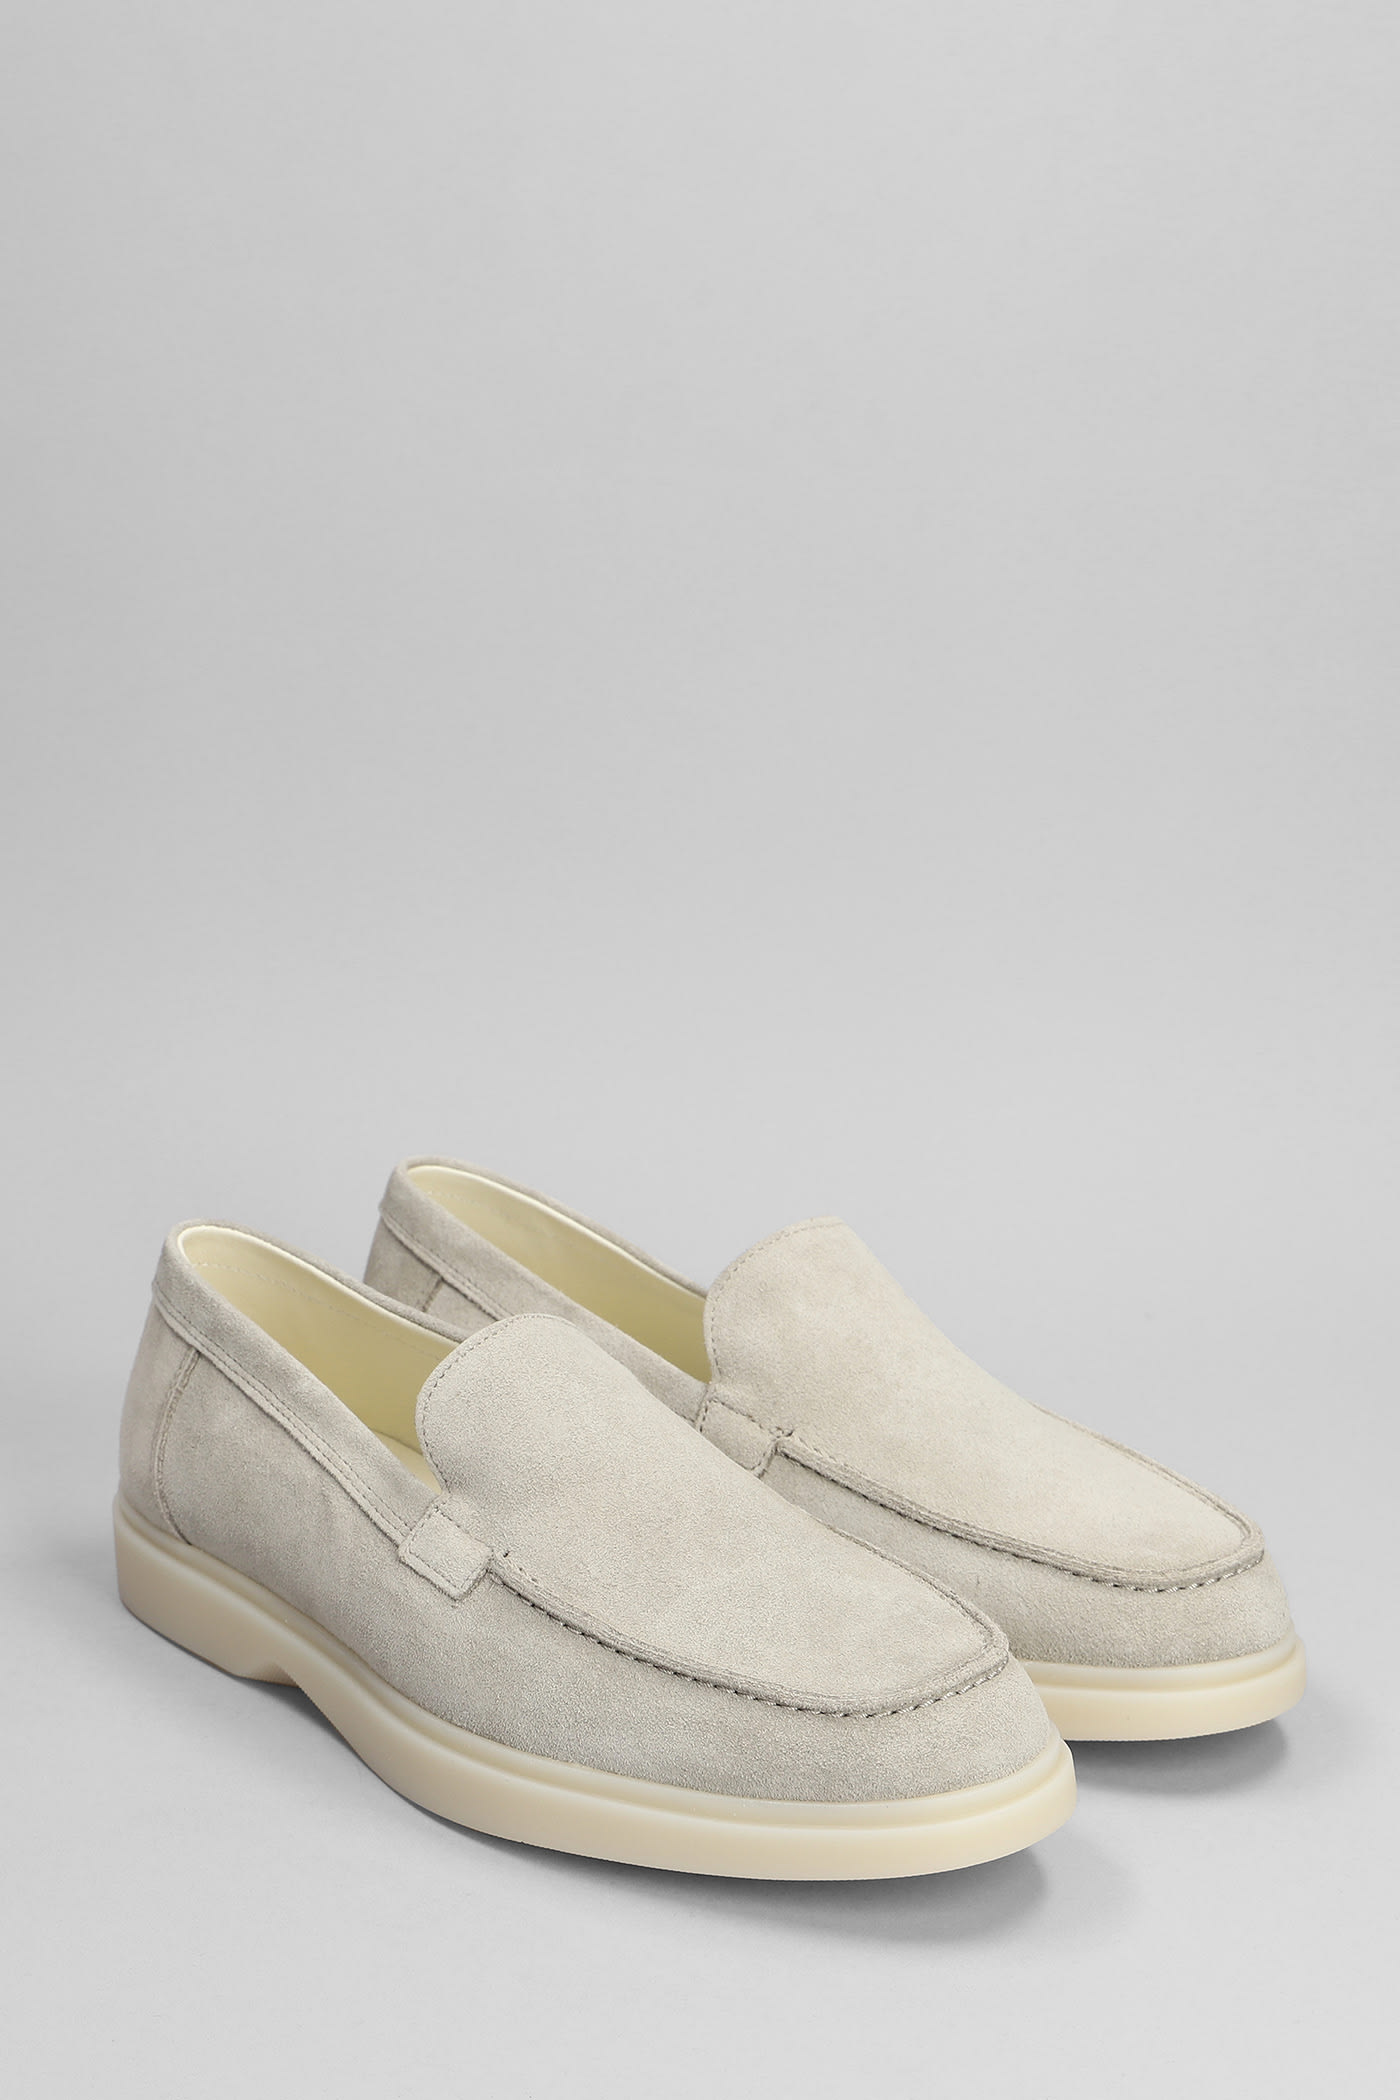 Shop Mason Garments Amalfi Loafers In Taupe Suede